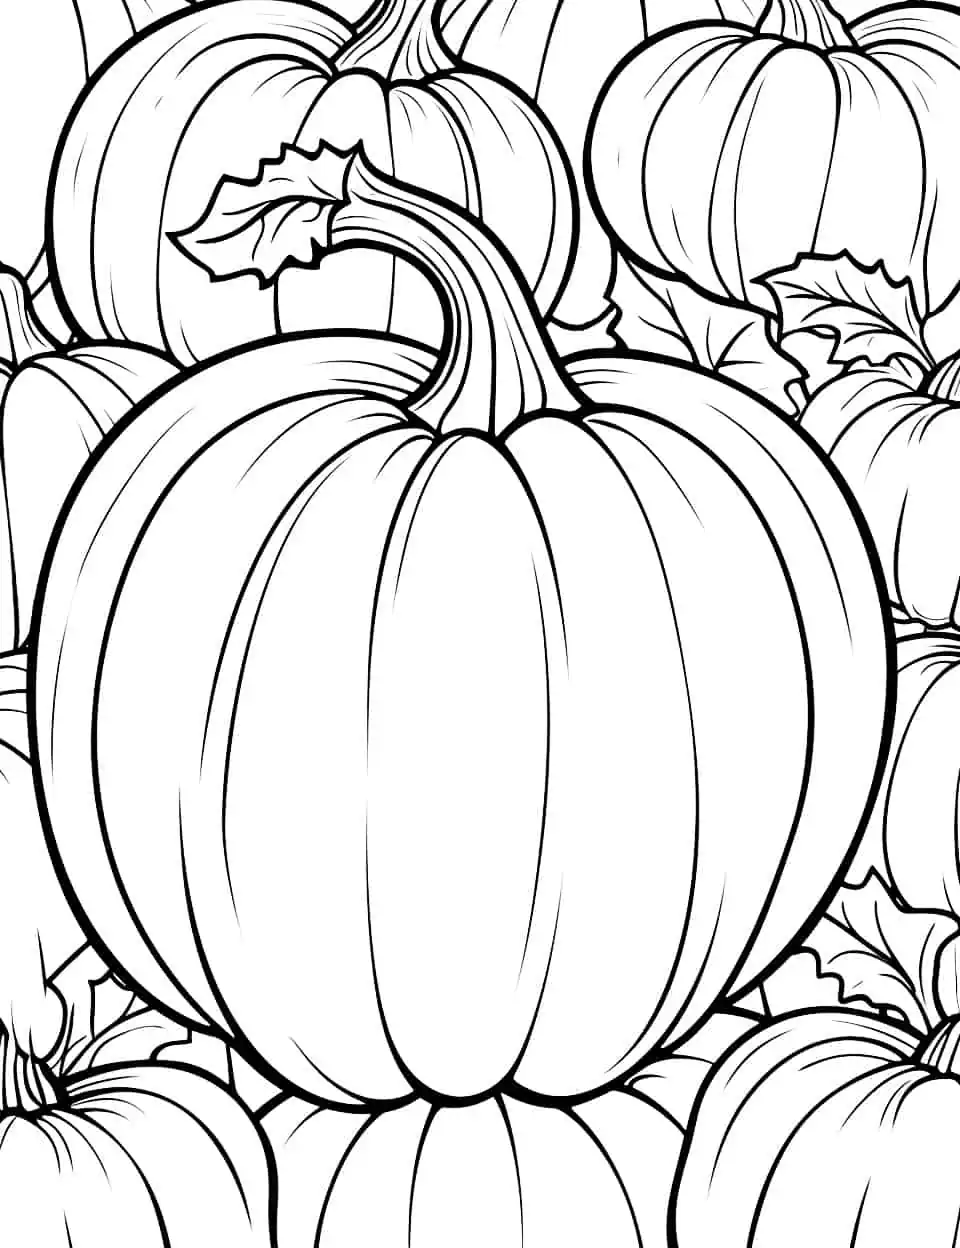 Pumpkin Full Page Coloring - A full page design of pumpkins for a long and entertaining coloring session.